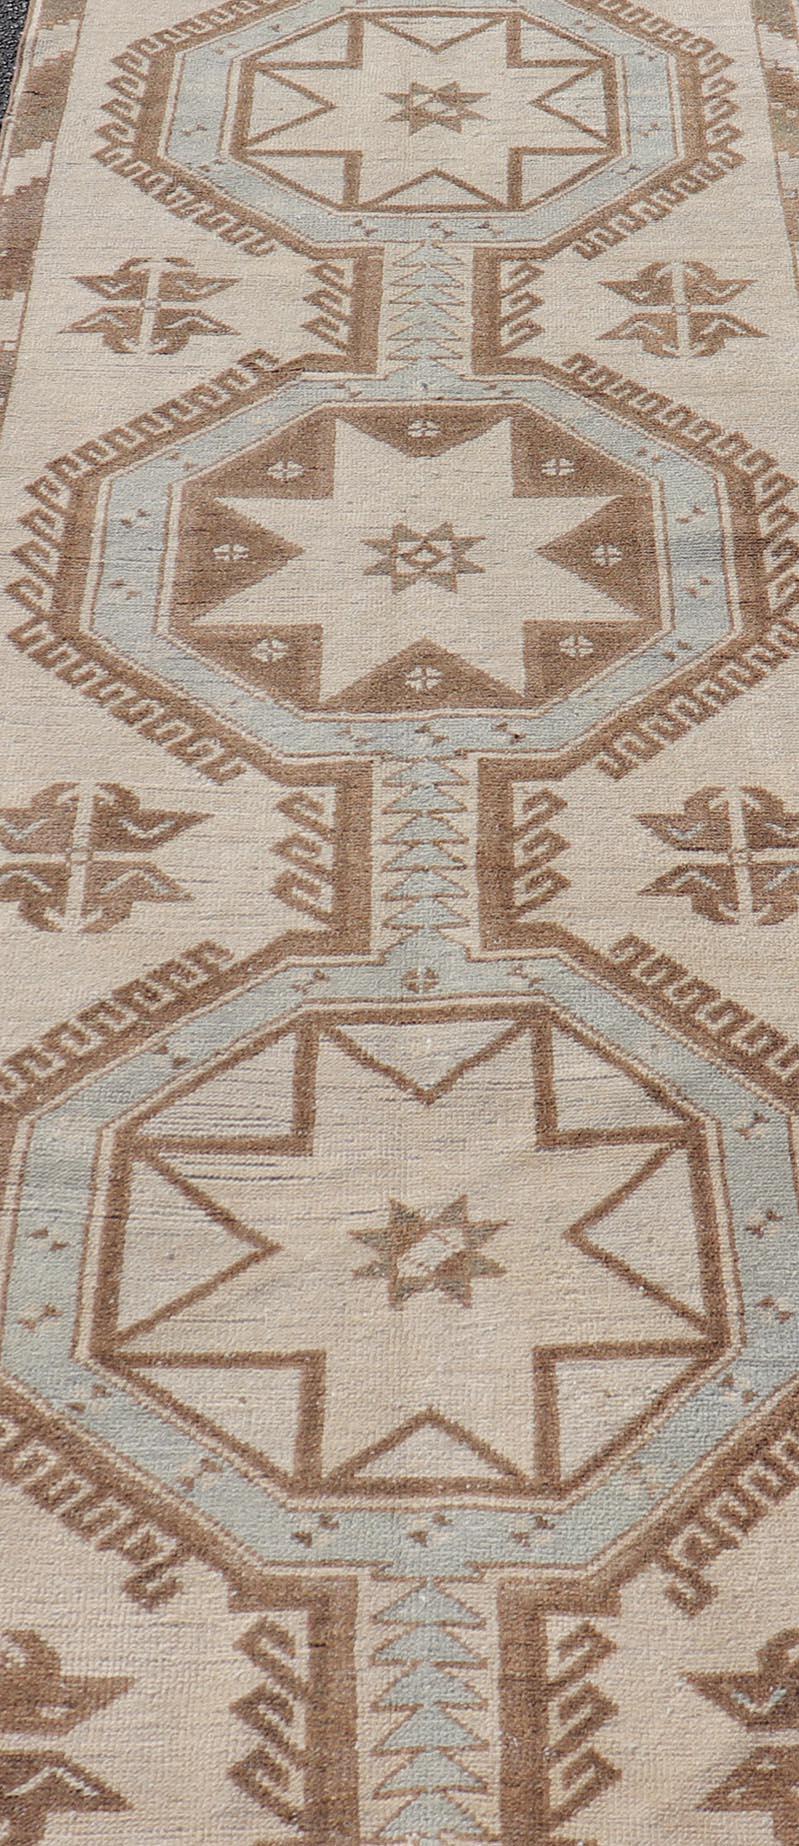 Vintage Turkish Oushak Runner with Geometric Medallions in Neutral Earth Colors For Sale 1